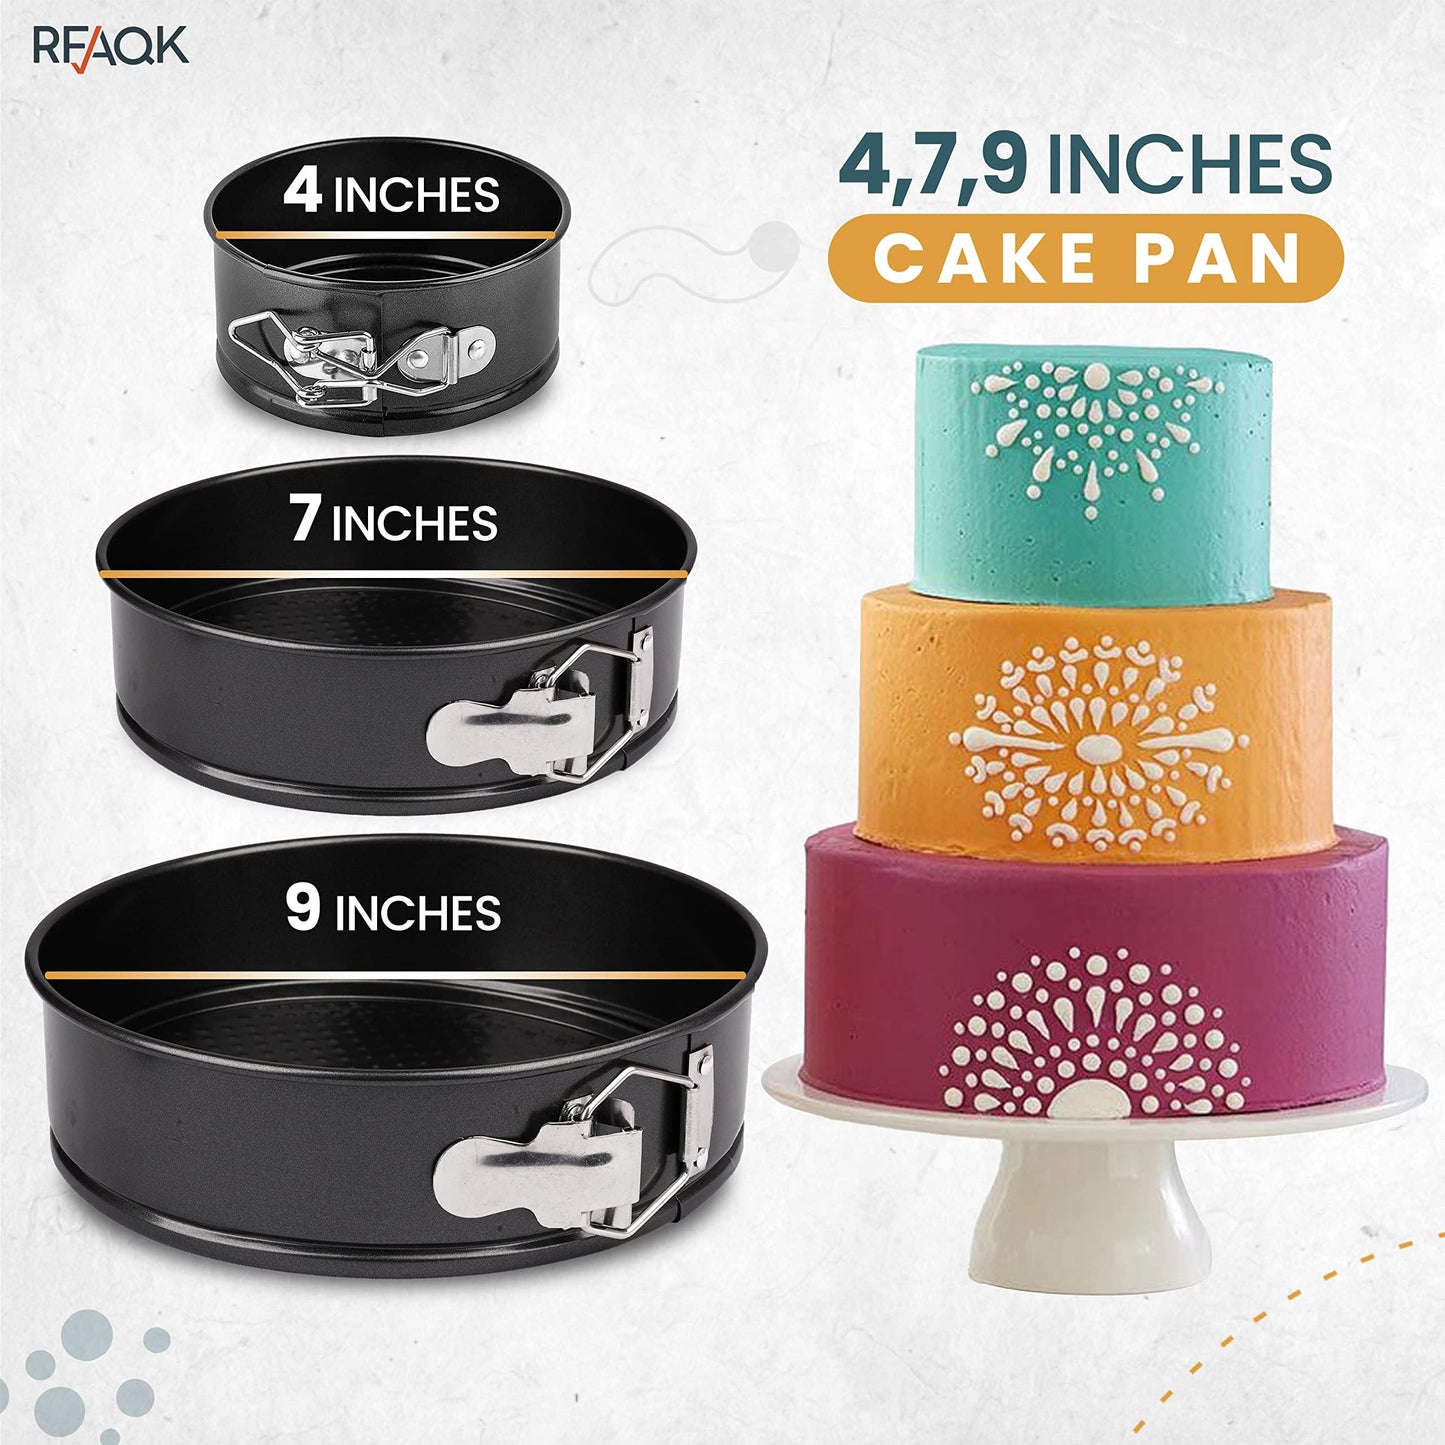 RFAQK Springform Pan Set of 3 (4”/7”/9”) Cake Pans Sets for Baking -Nonstick Leakproof 3 Tier Cake Pan Bakeware with 50 Pcs Parchment Paper Liners for Small, Medium, and Large Shape Cakes with Ebook - CookCave